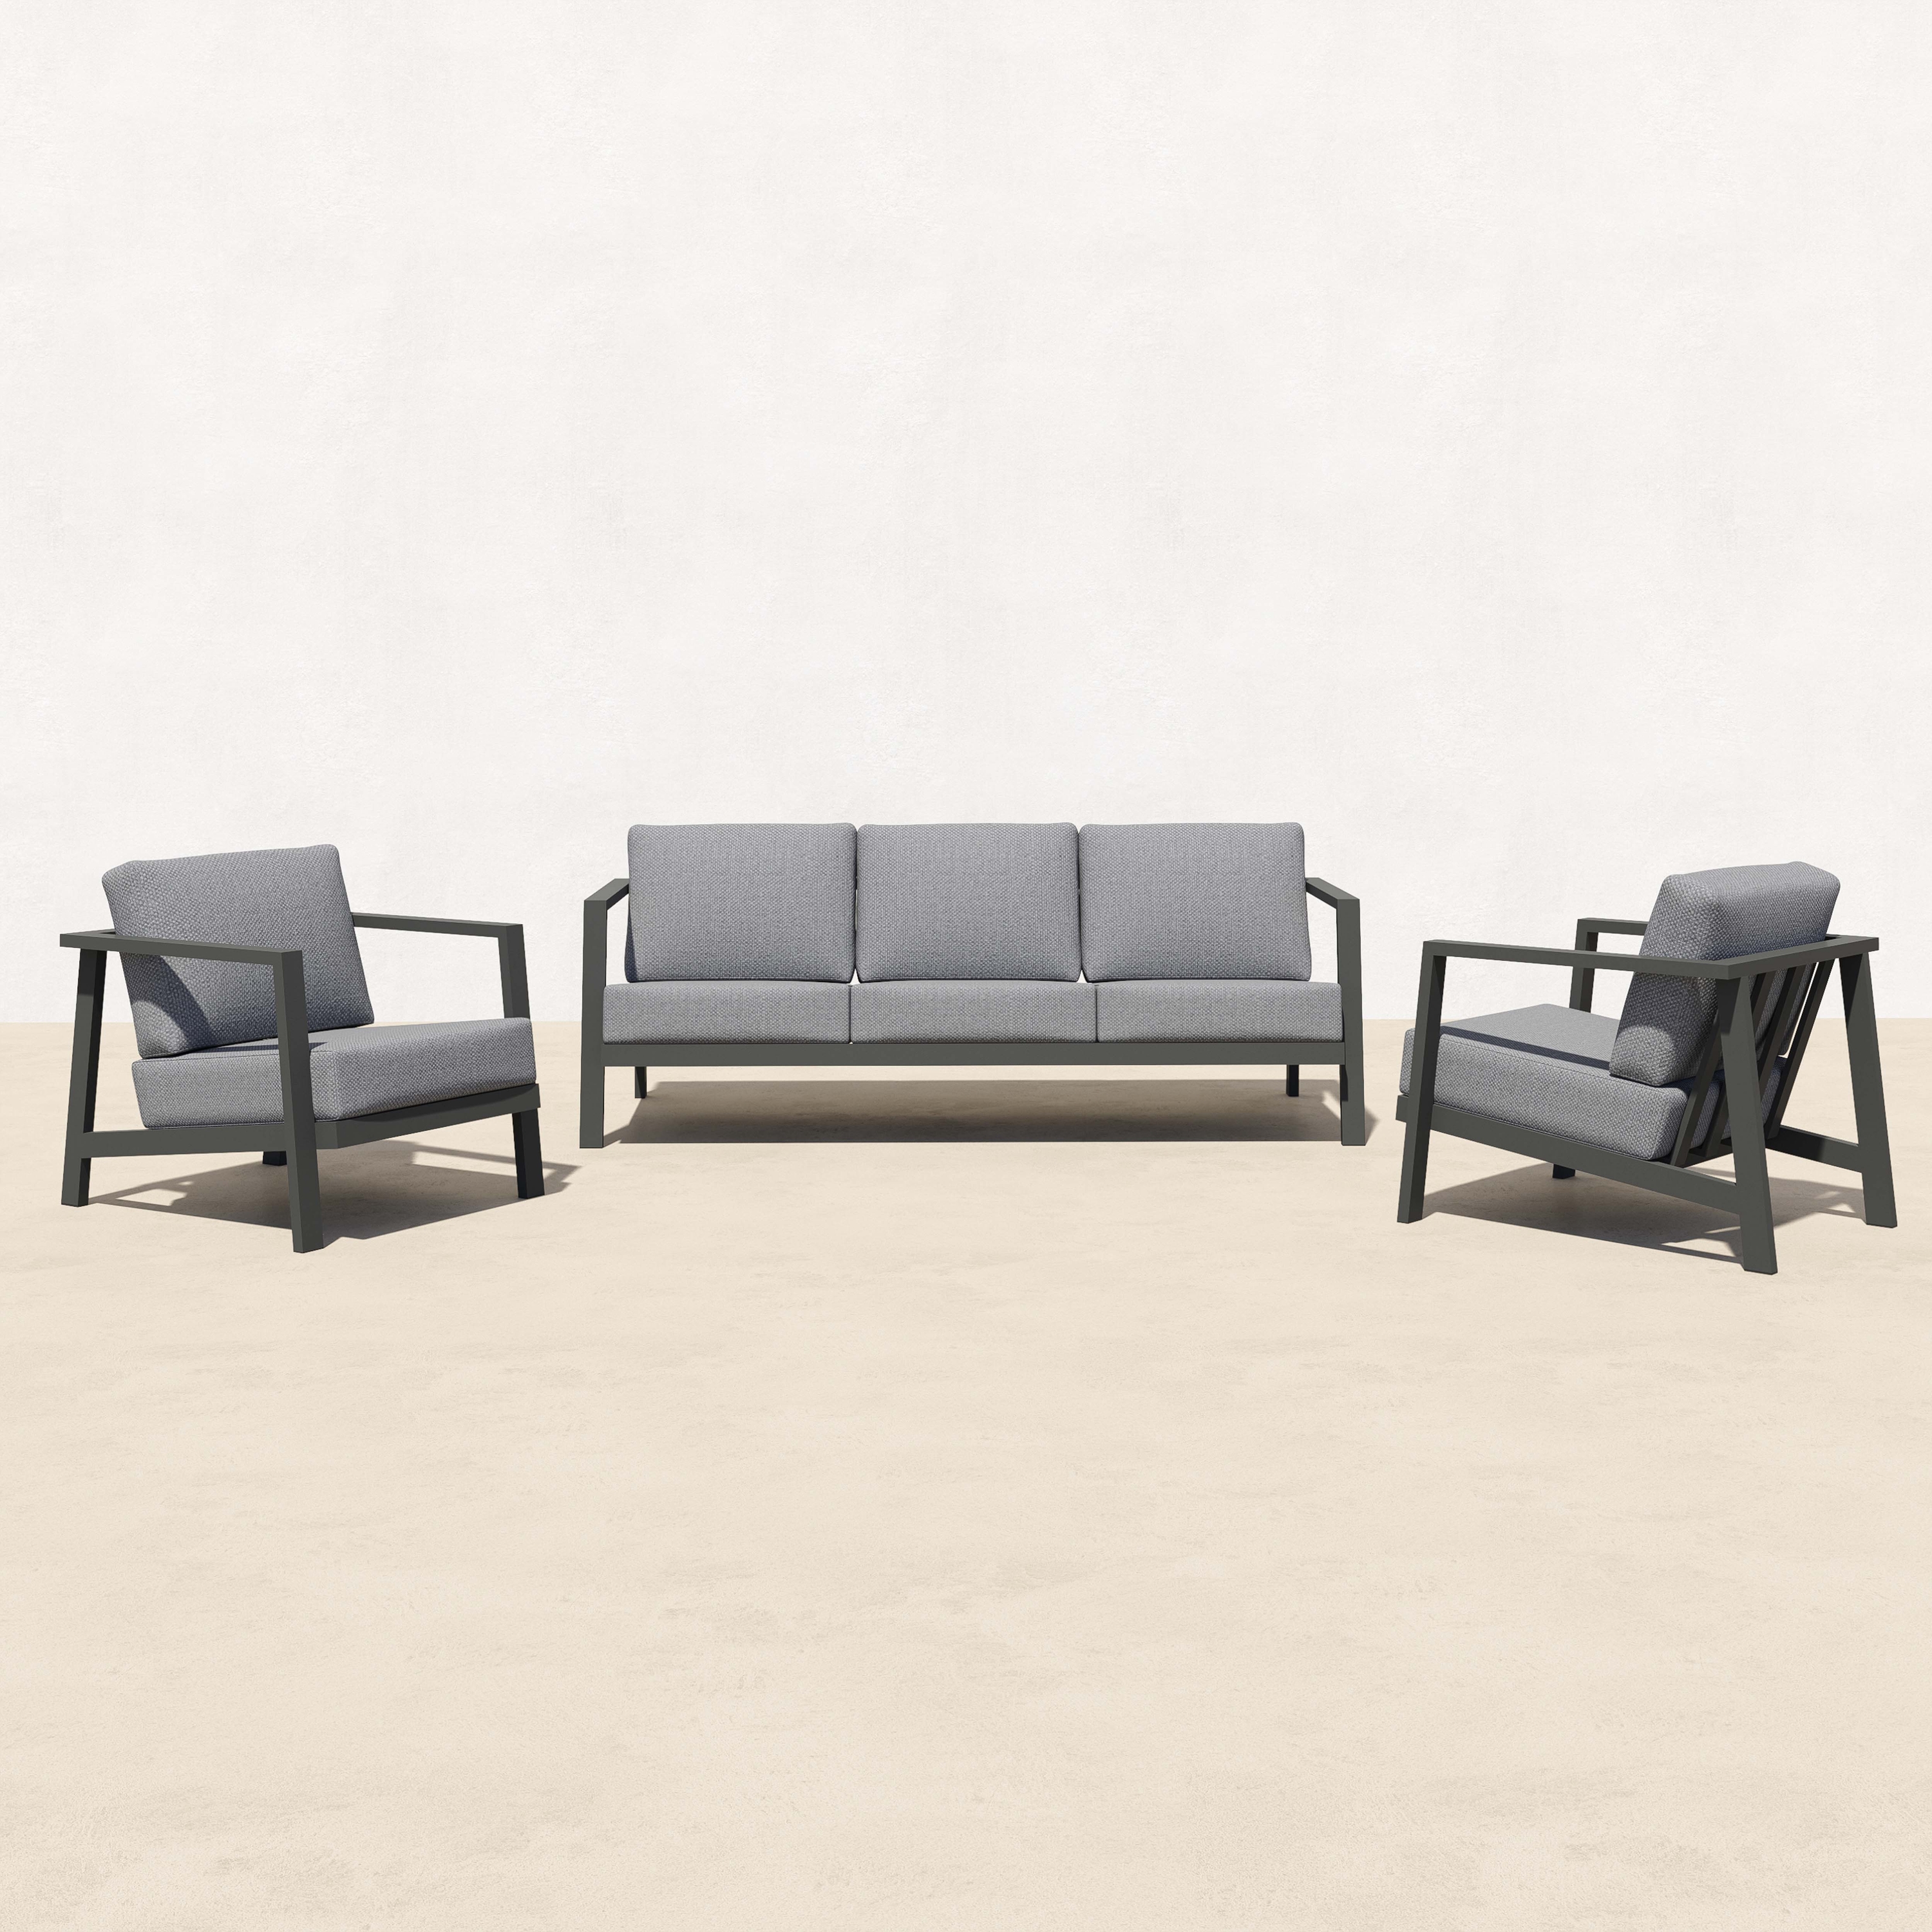 KATE Aluminum Outdoor Sofa with Armchairs - 5 Seat